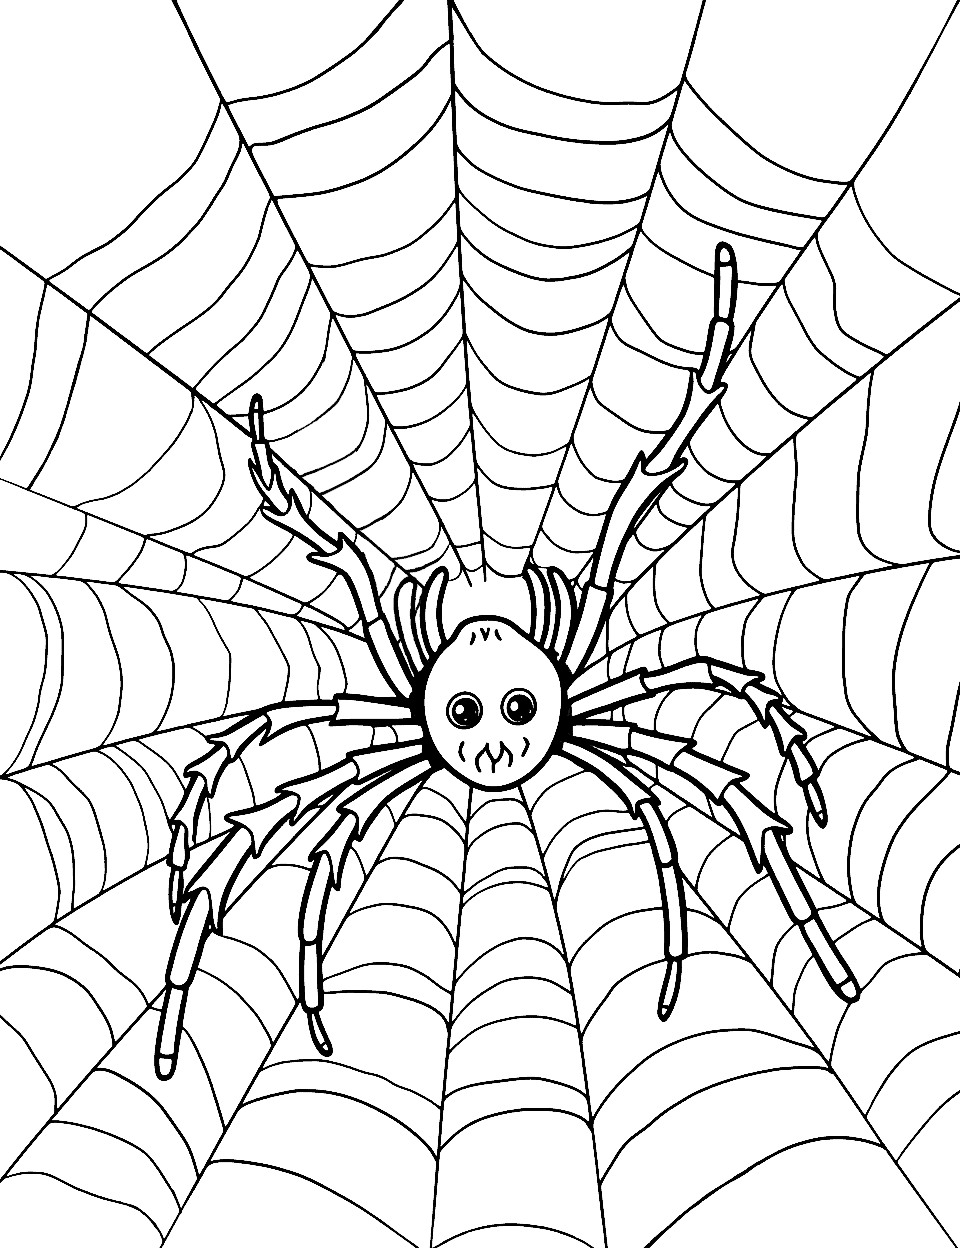 Busy Spider Weaving Animal Coloring Page - A spider weaving an intricate web between tree branches.